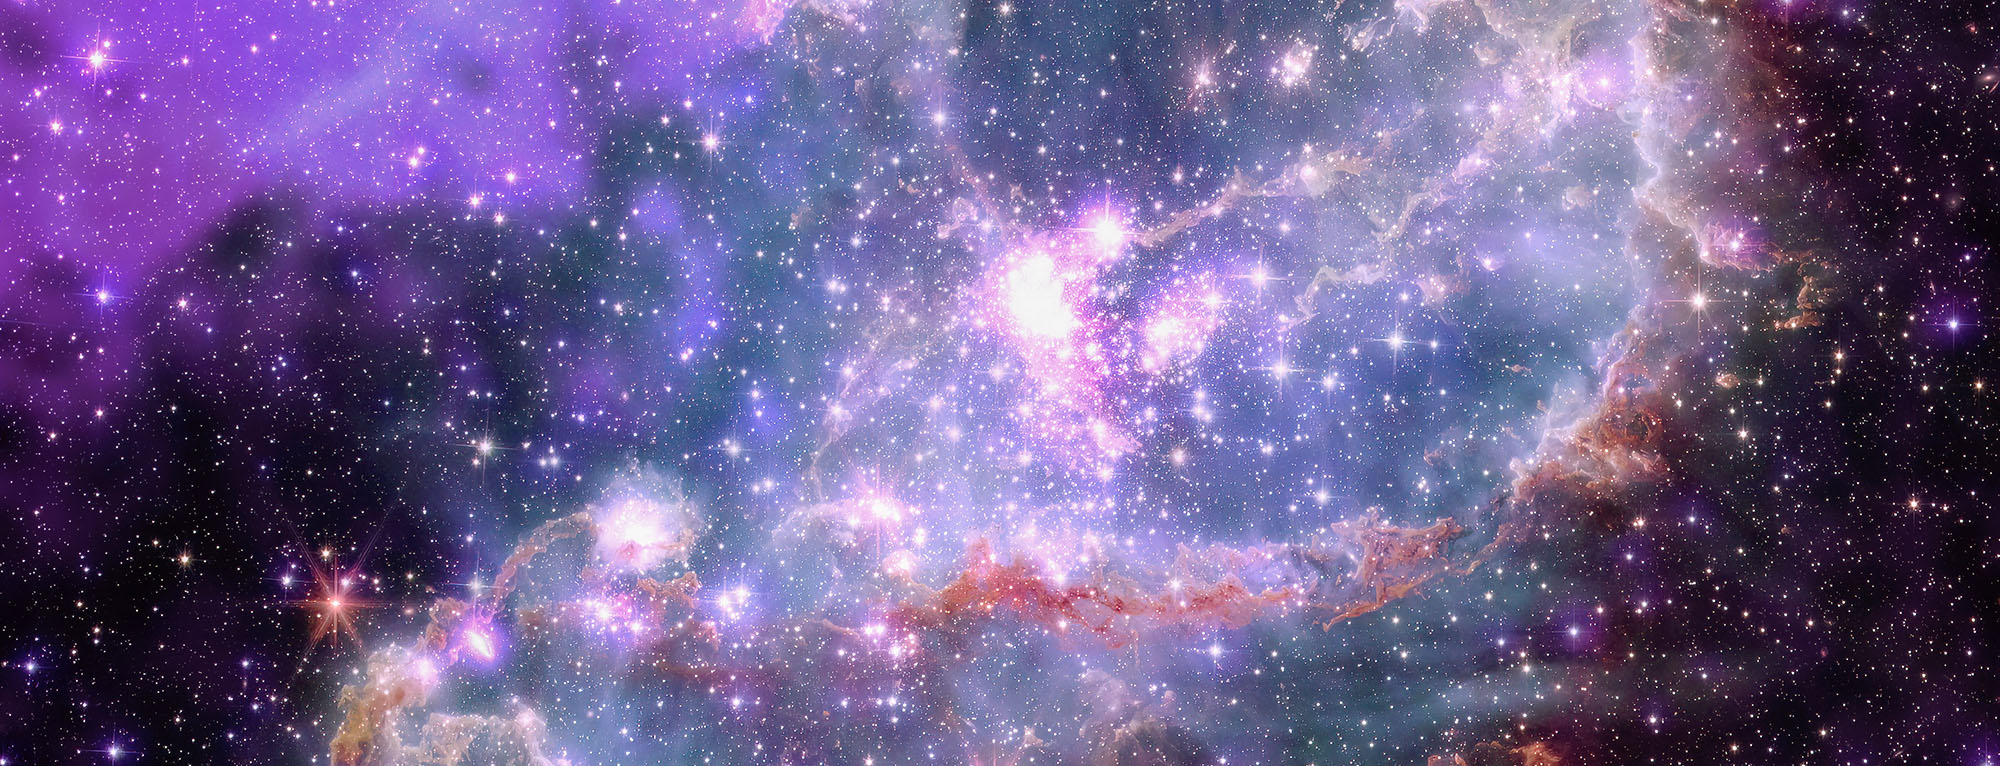 stars, galaxies and gas clouds in space